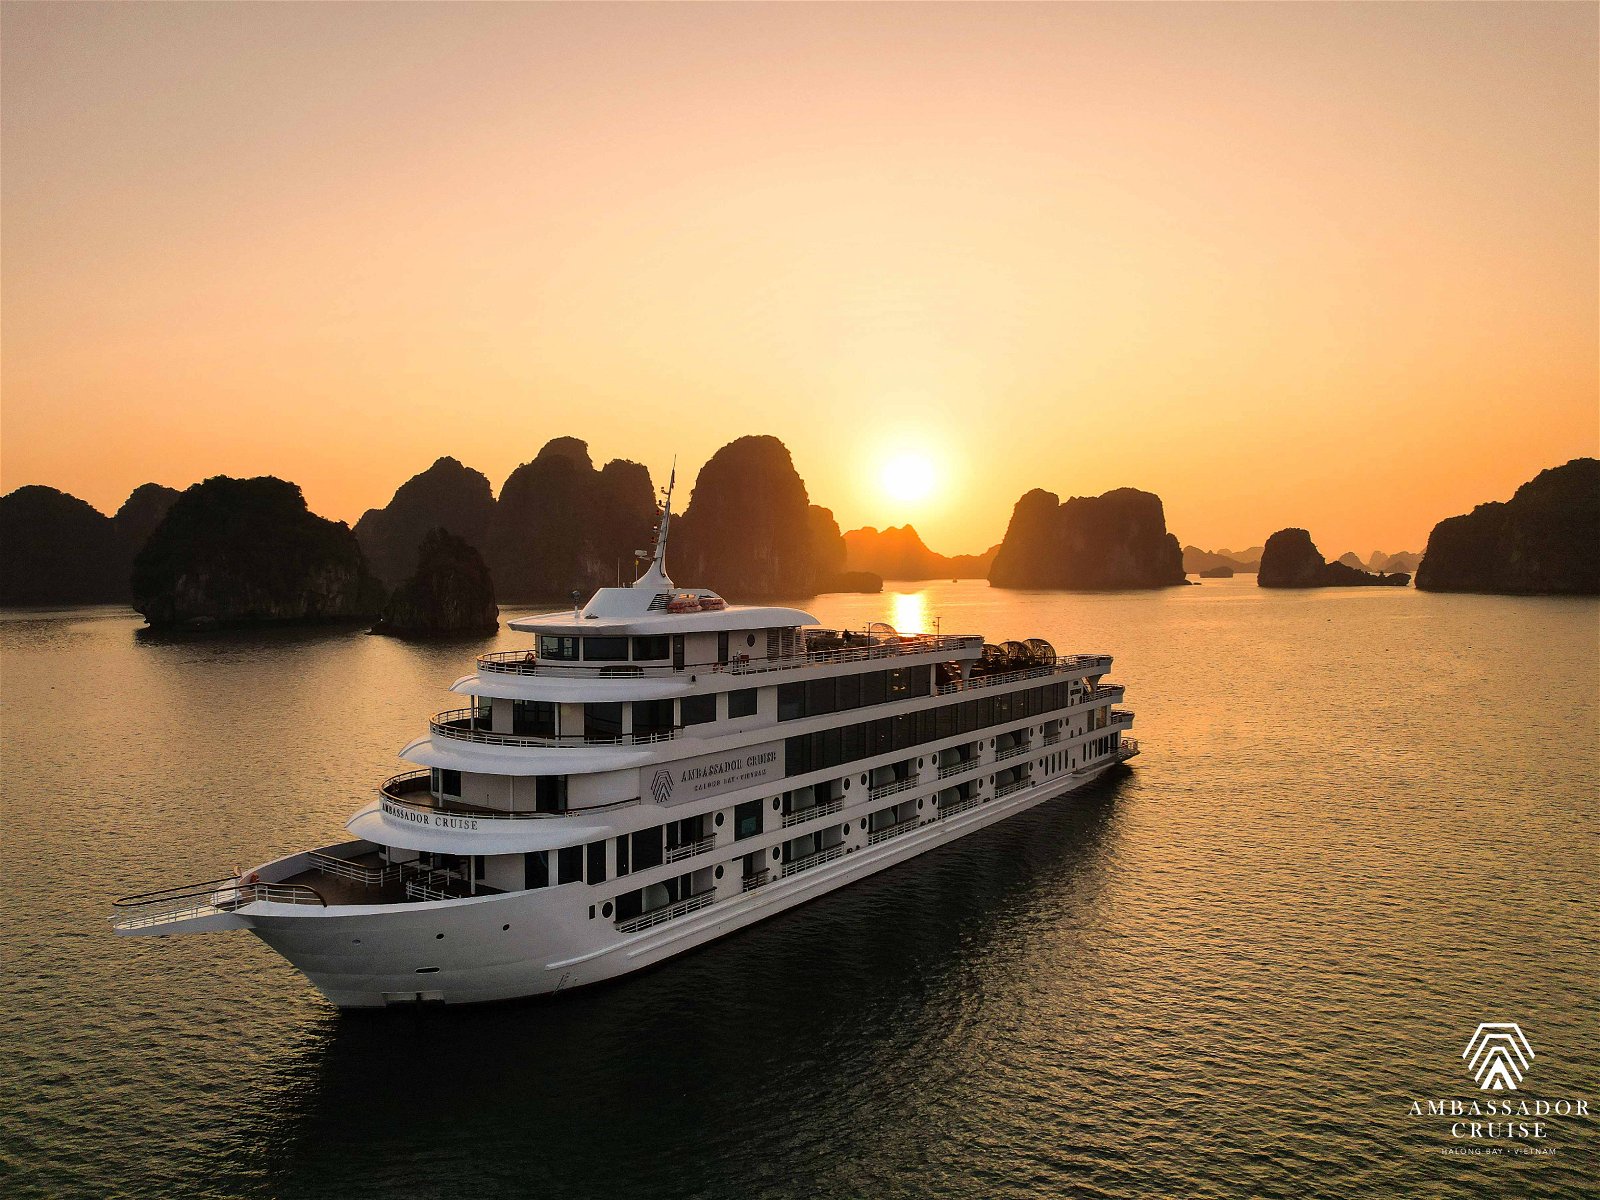 Halong Bay Day Cruise – 8 Hours Halong Bay Discovery + Premium Lunch + Jacuzzi & Cooking Class